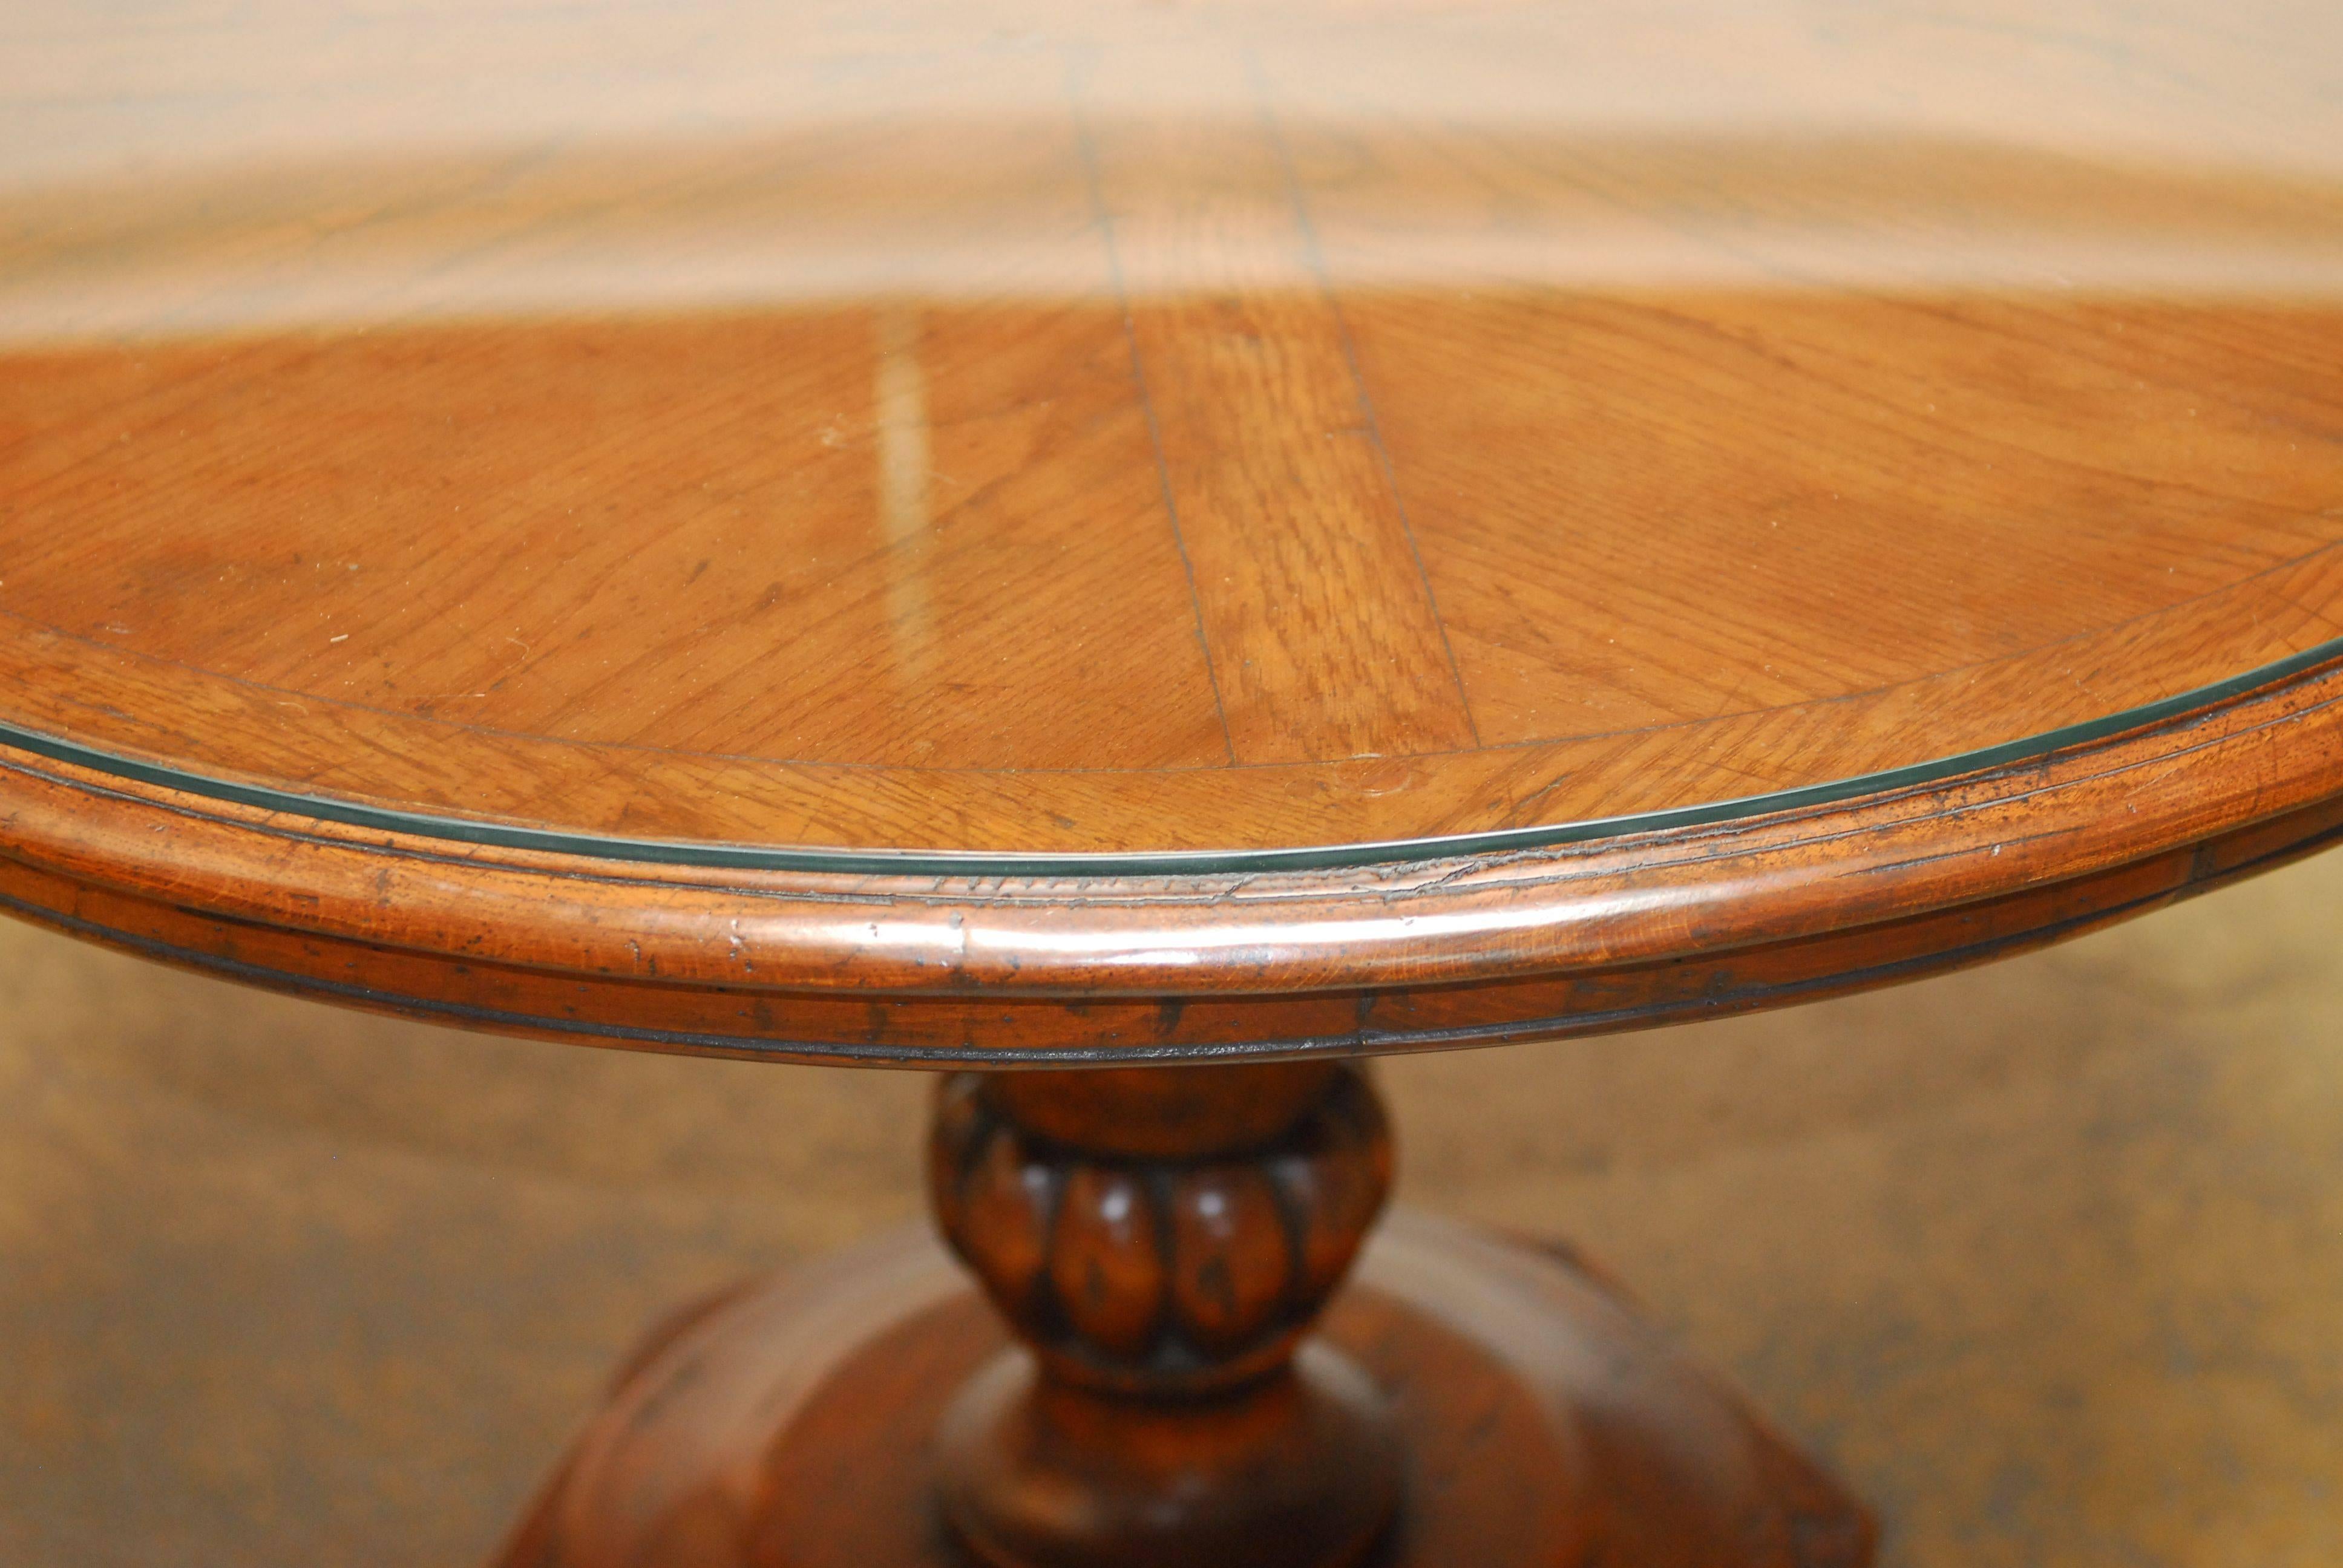 Country English style pedestal table by Guy Chaddock from his 